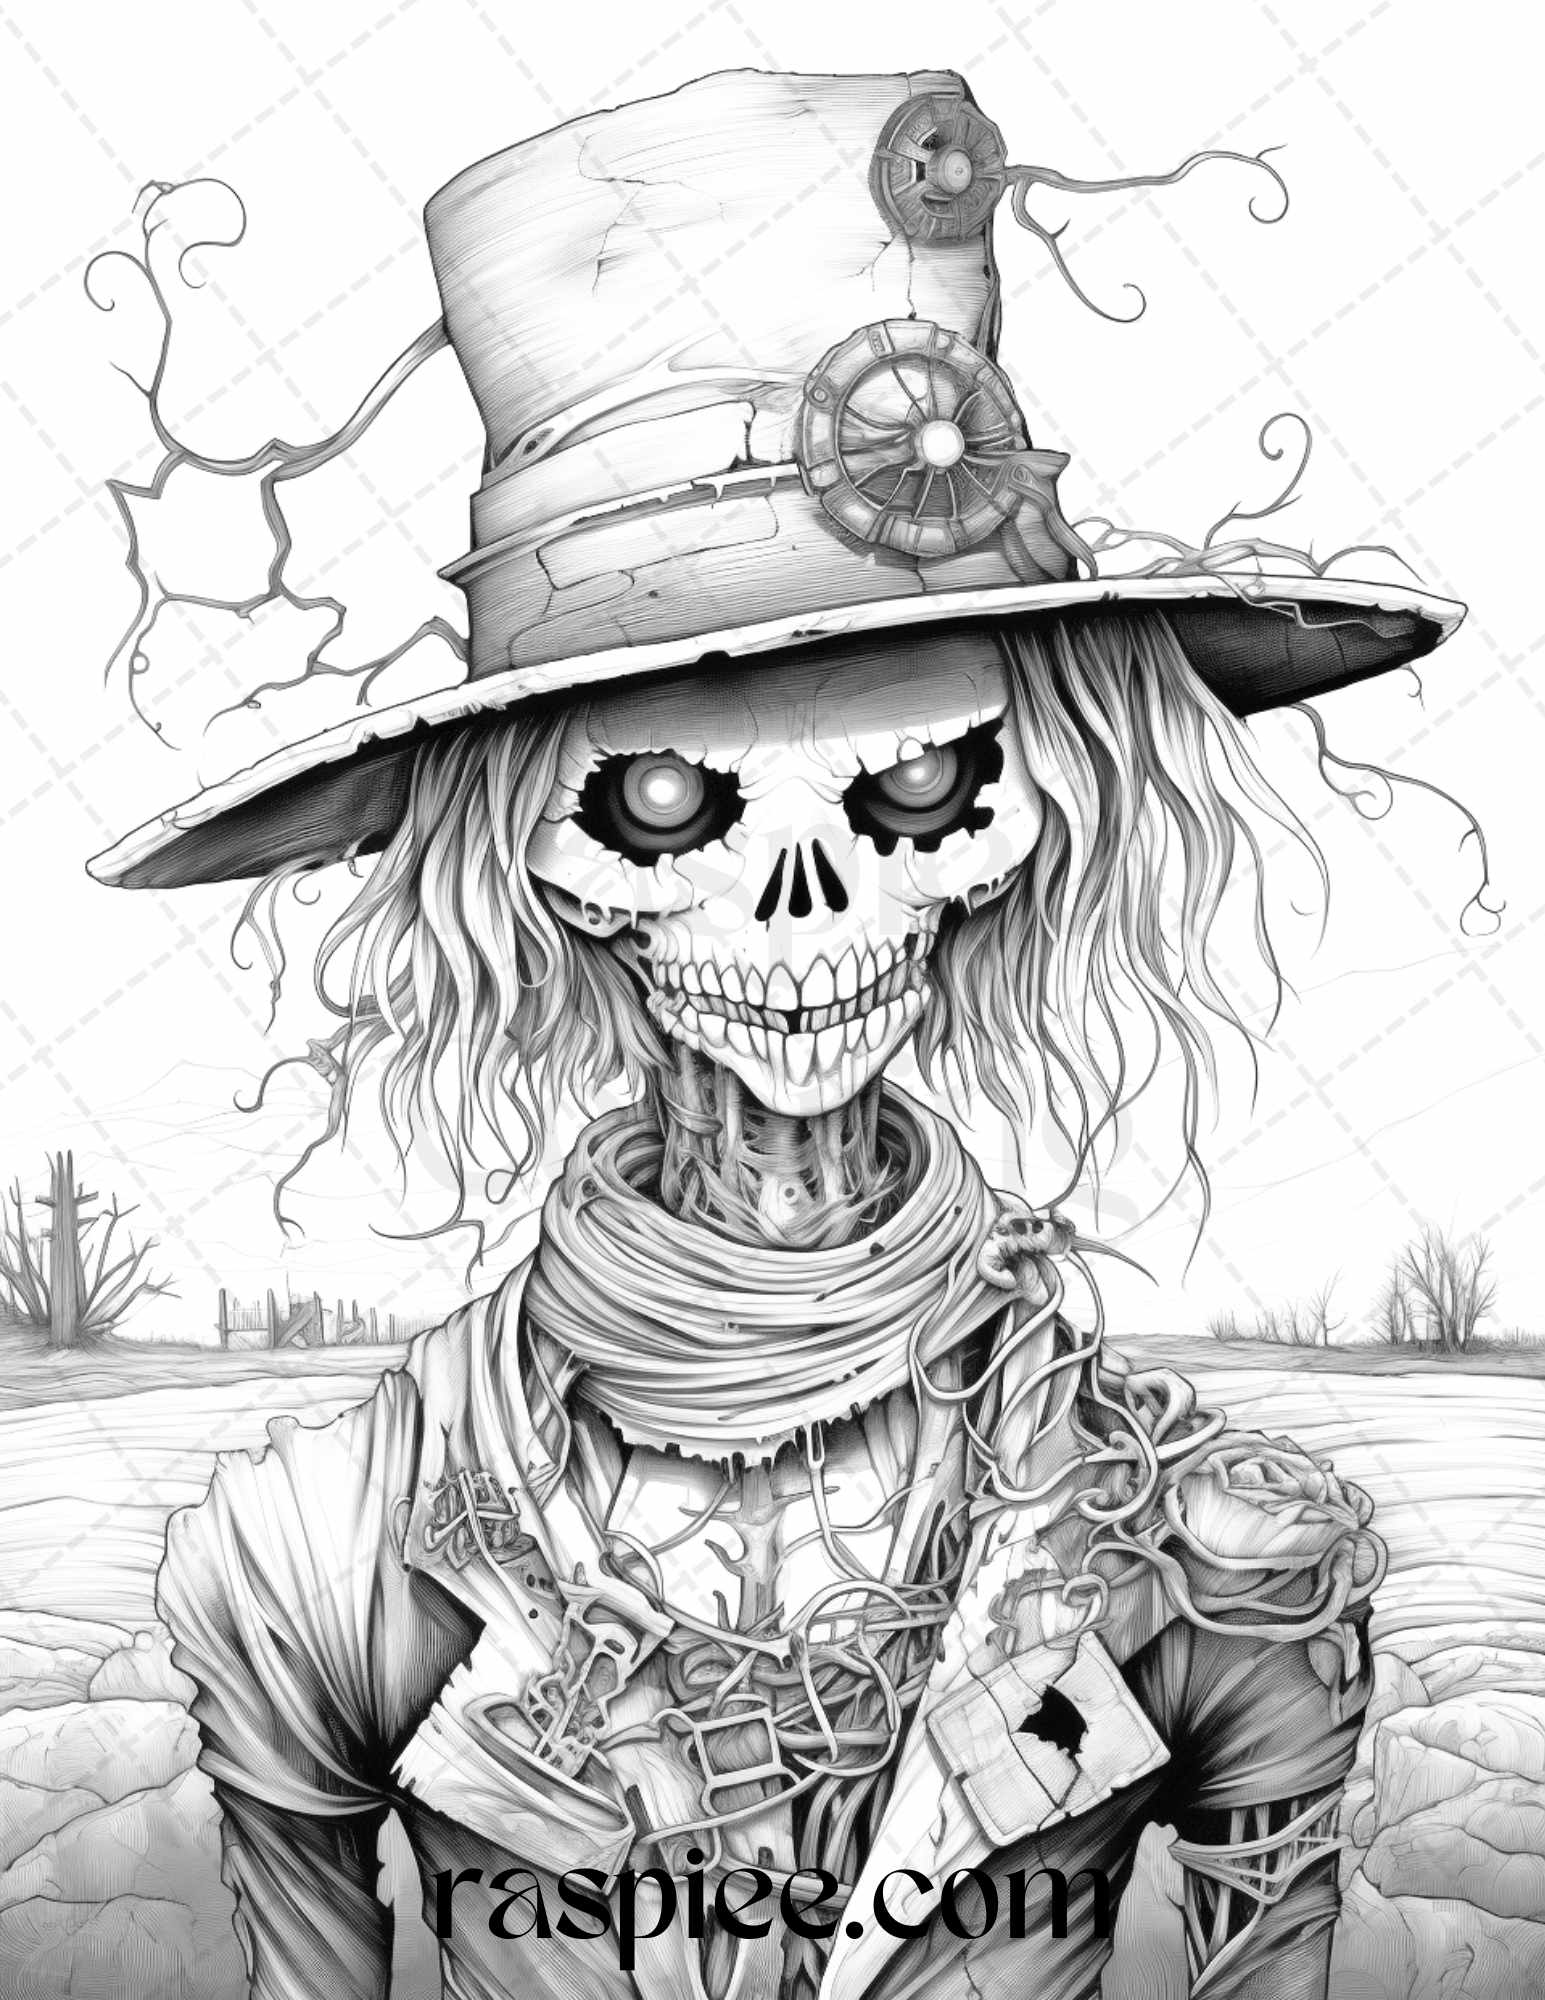 Scary Steampunk Scarecrow Coloring Page, Halloween Grayscale Coloring Printable, Intricate Adult Coloring Illustration, Detailed Gothic Coloring Page, Halloween-Themed DIY Coloring, Printable Creepy Halloween Decor